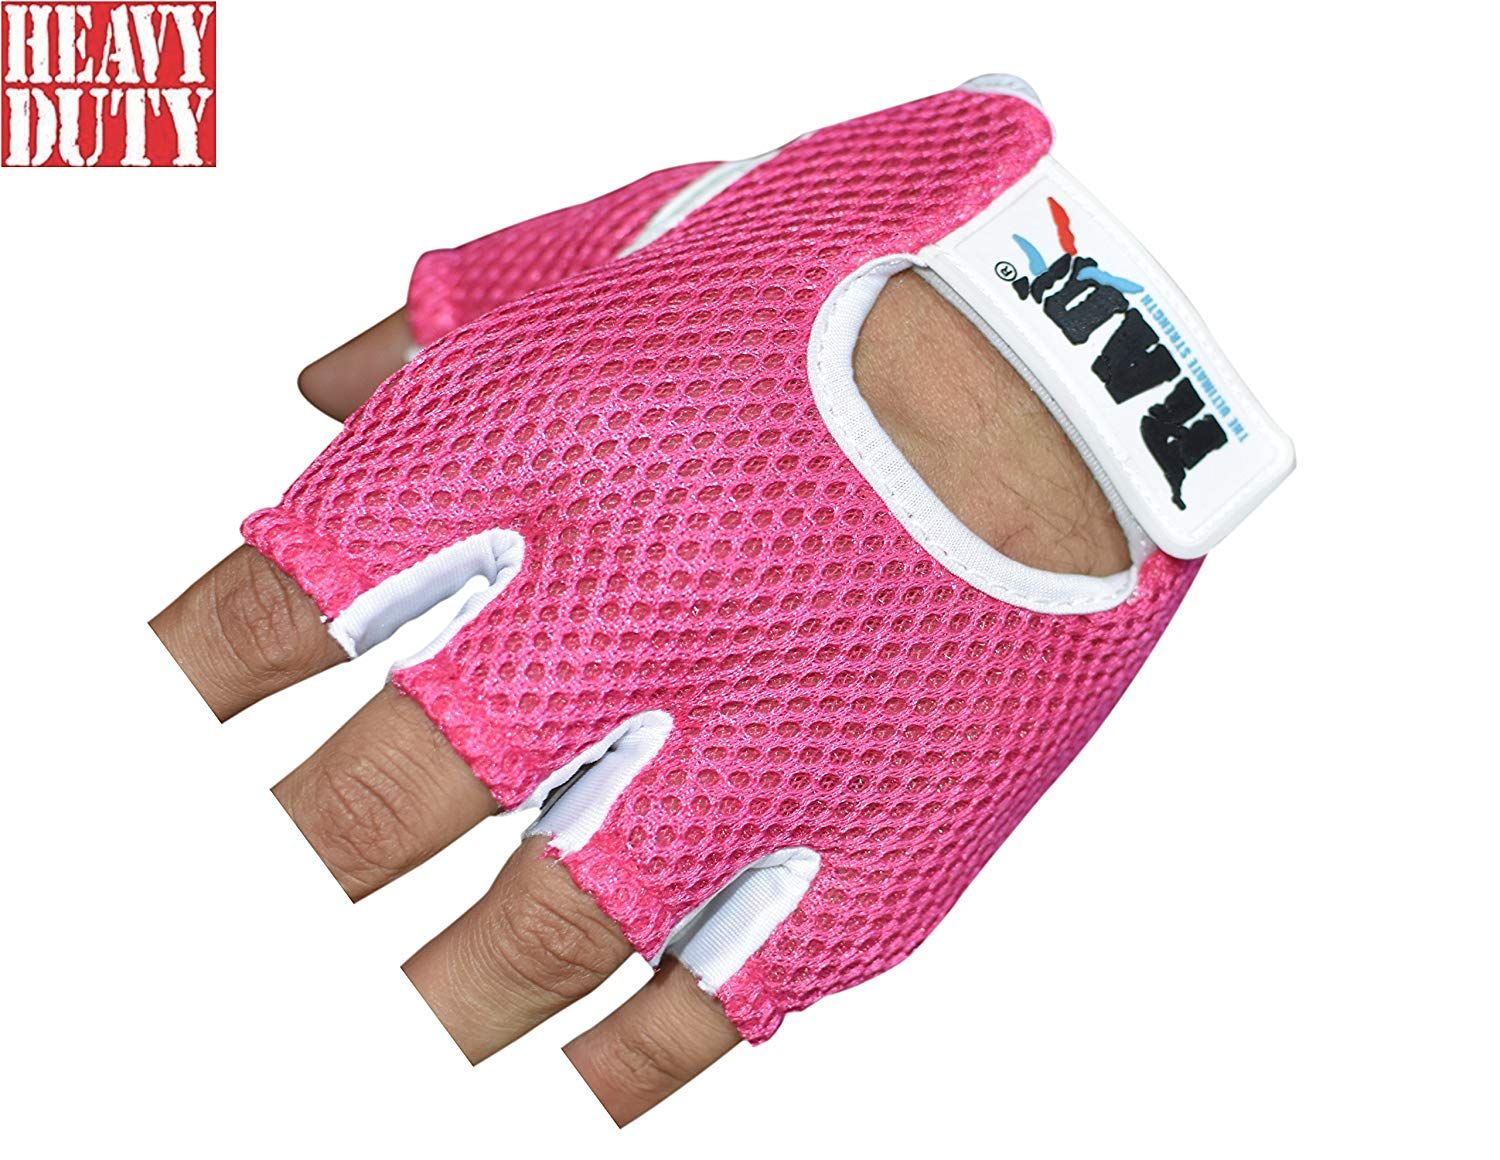 leather weight lifting gloves